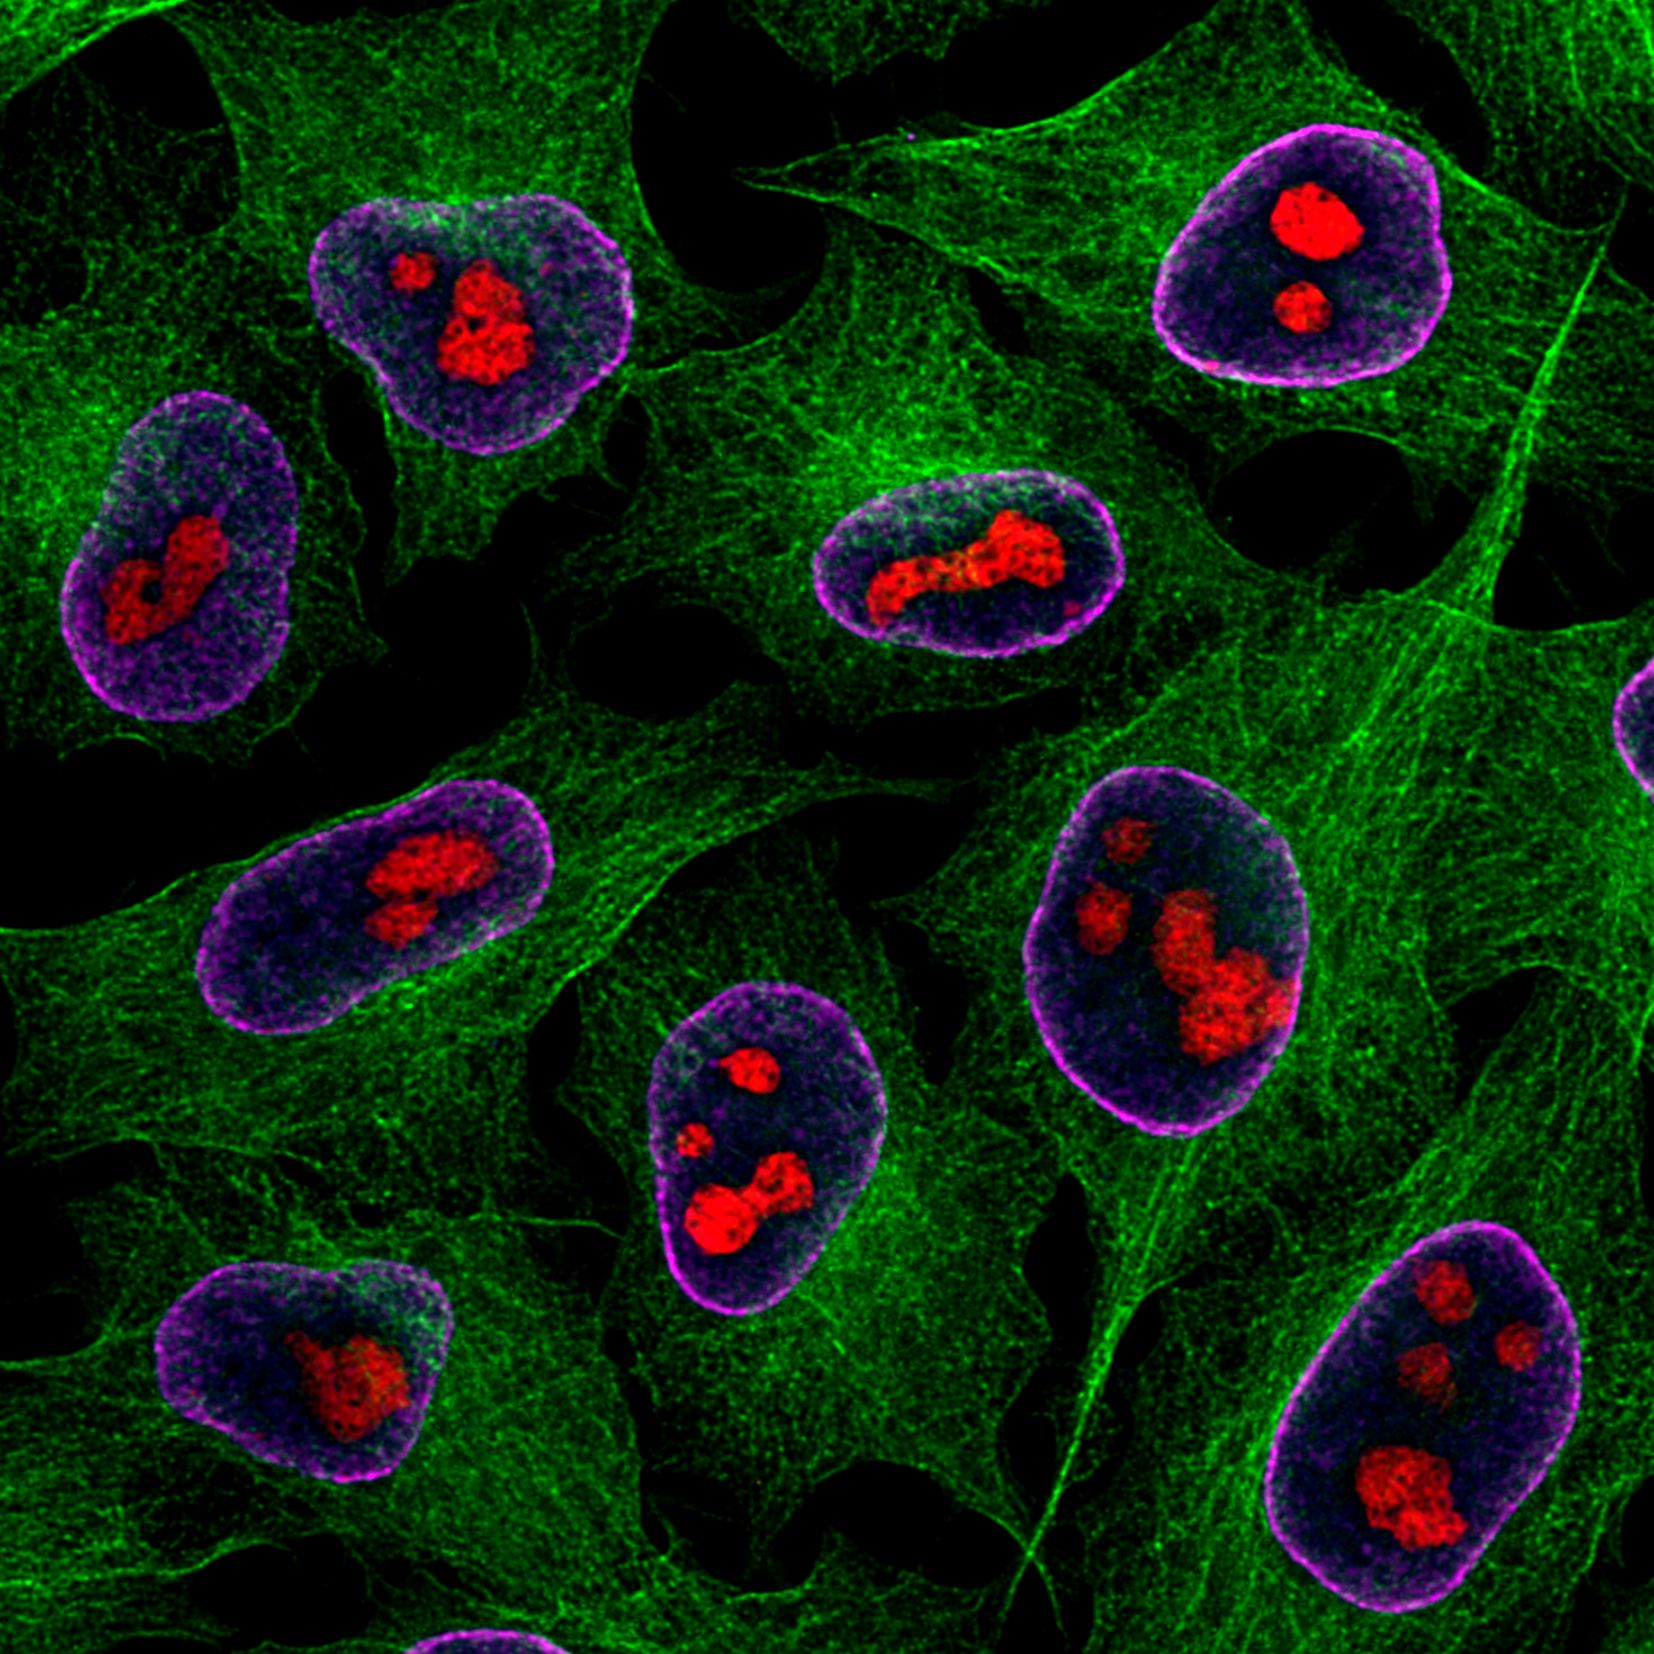 Immunofluorescence of HeLa: PFA-fixed HeLa cells were stained with anti-Tubulin (66240-1-Ig) labeled with FlexAble CoraLite® Plus 488 Kit (KFA041, green), anti-Lamin labeled with FlexAble CoraLite® Plus 647 Kit (KFA043, magenta), CoraLite® 594-conjugated GNL3 antibody (CL594-67169) and DAPI (blue).
Confocal images were acquired with a 100x oil objective and post-processed. Images were recorded at the Core Facility Bioimaging at the Biomedical Center, LMU Munich.